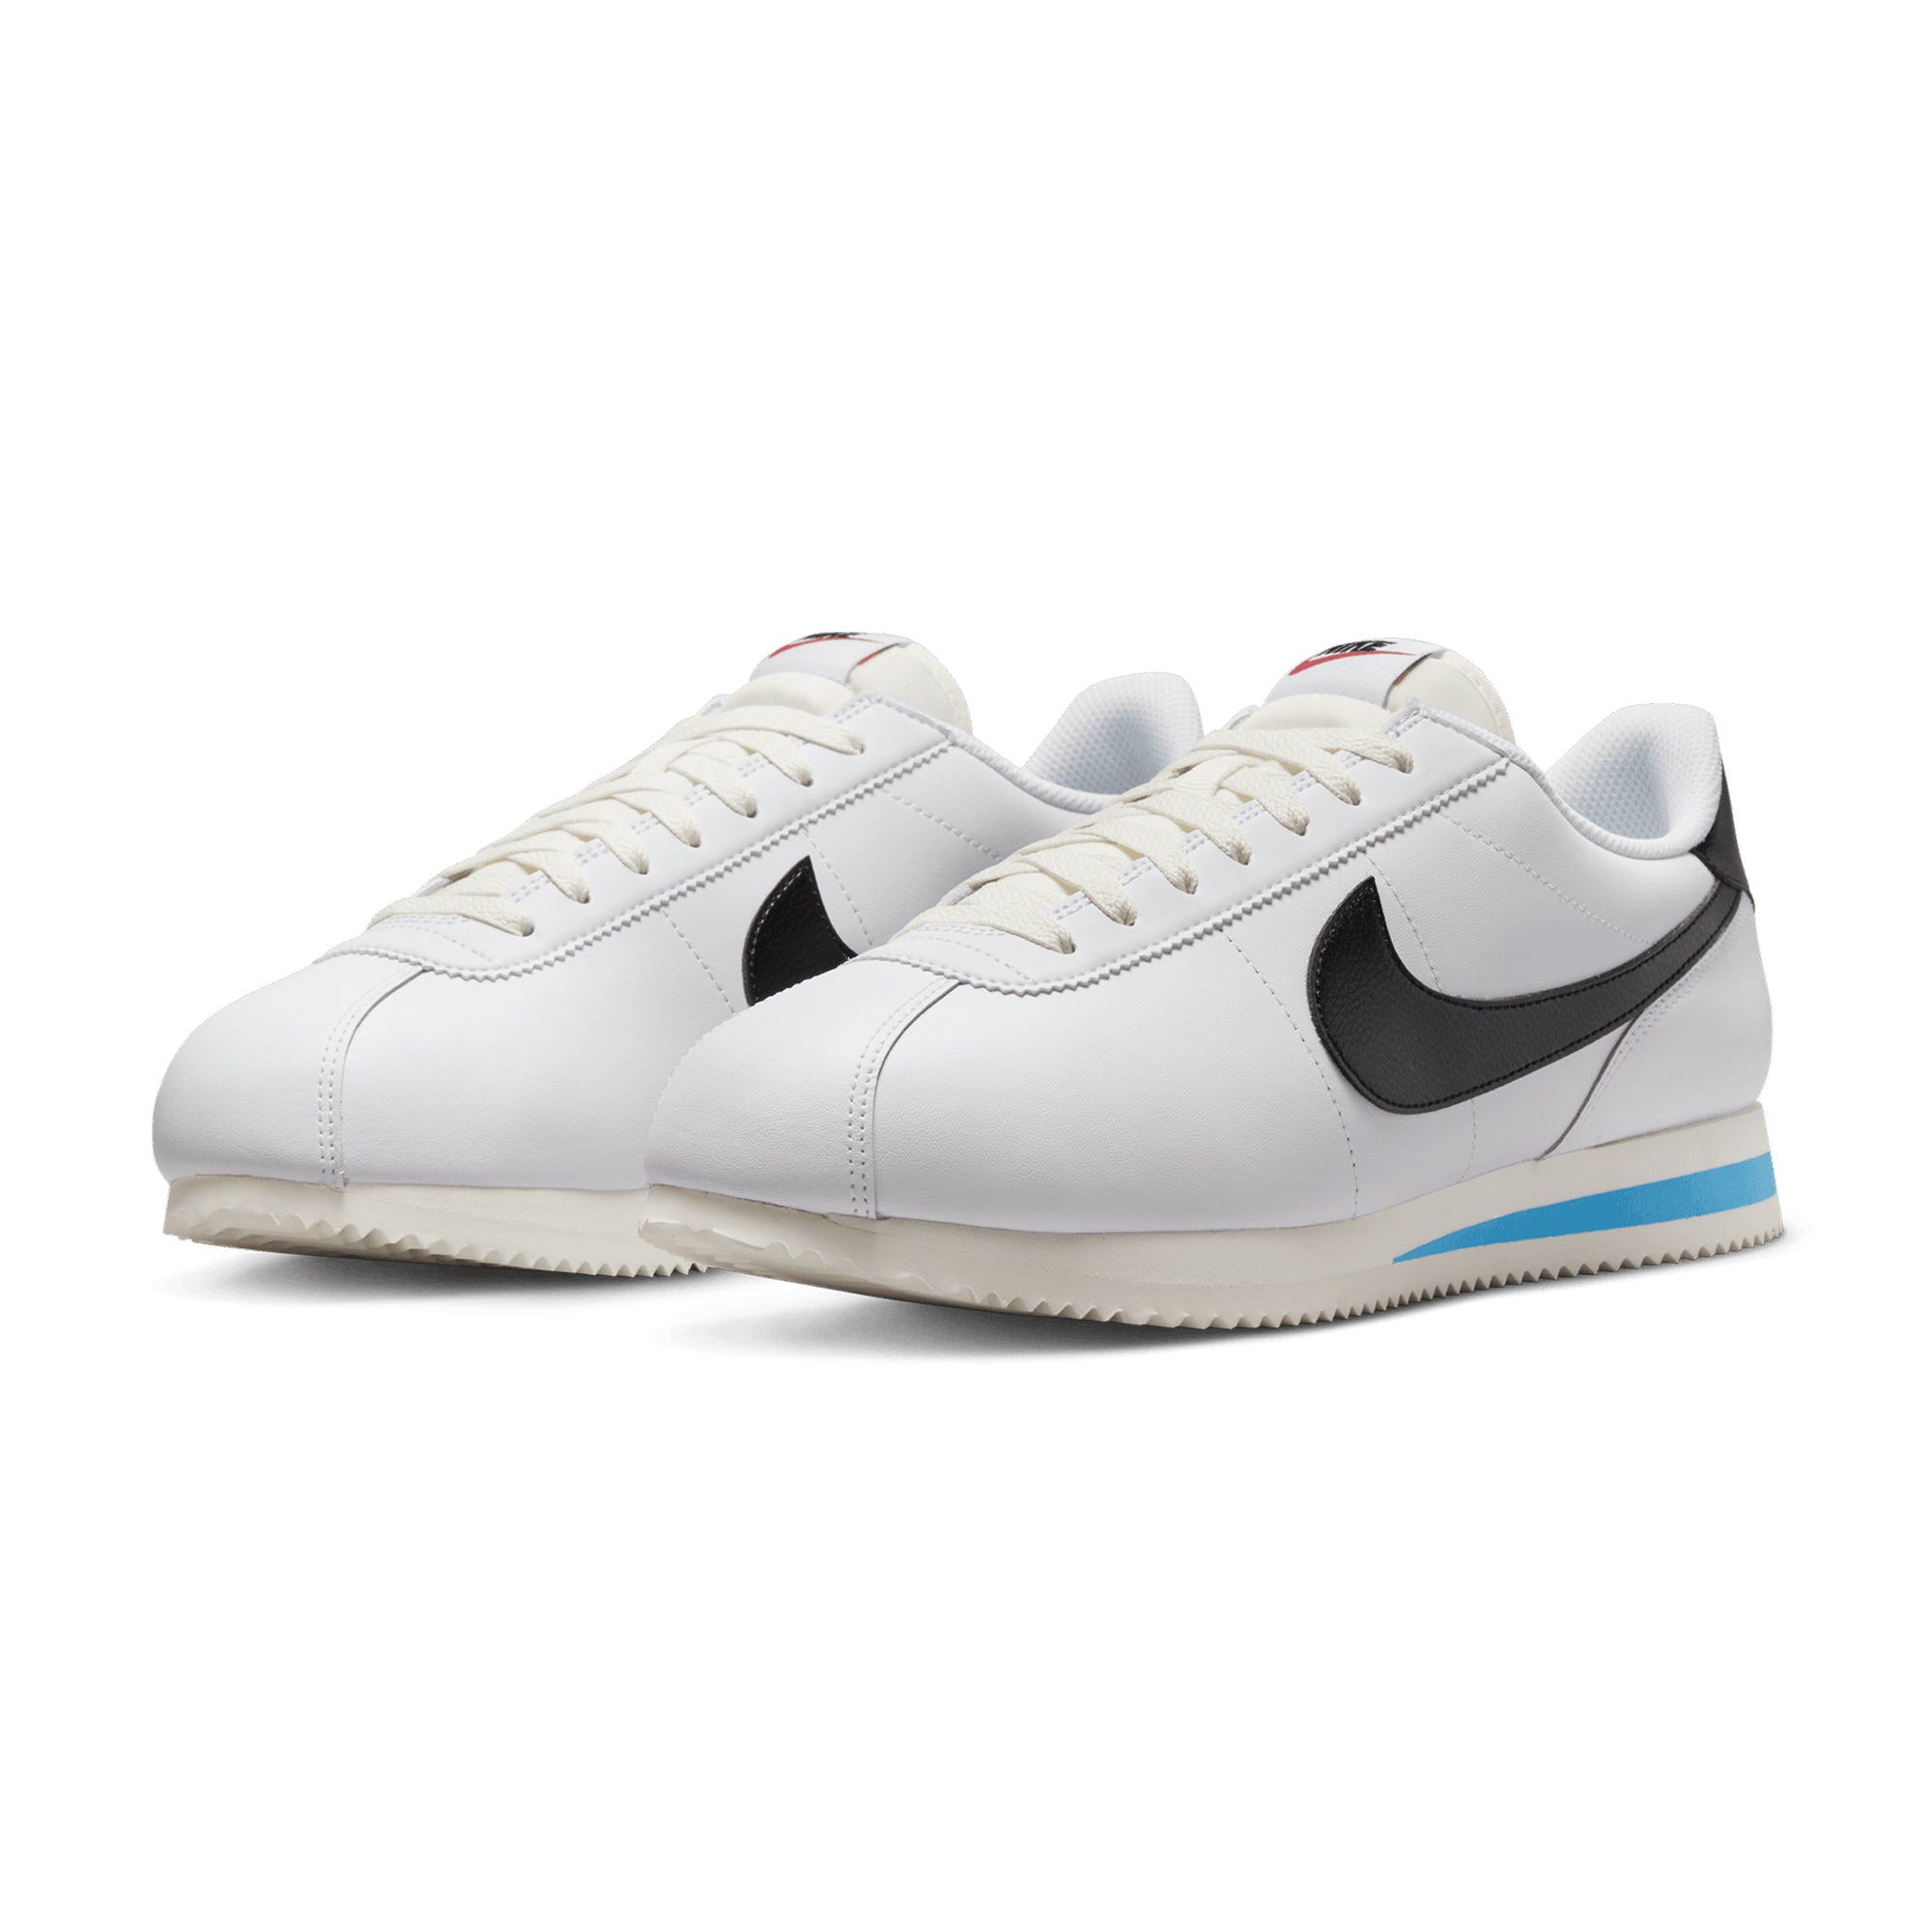 nike air force 1 low worldwide 2020 for sale